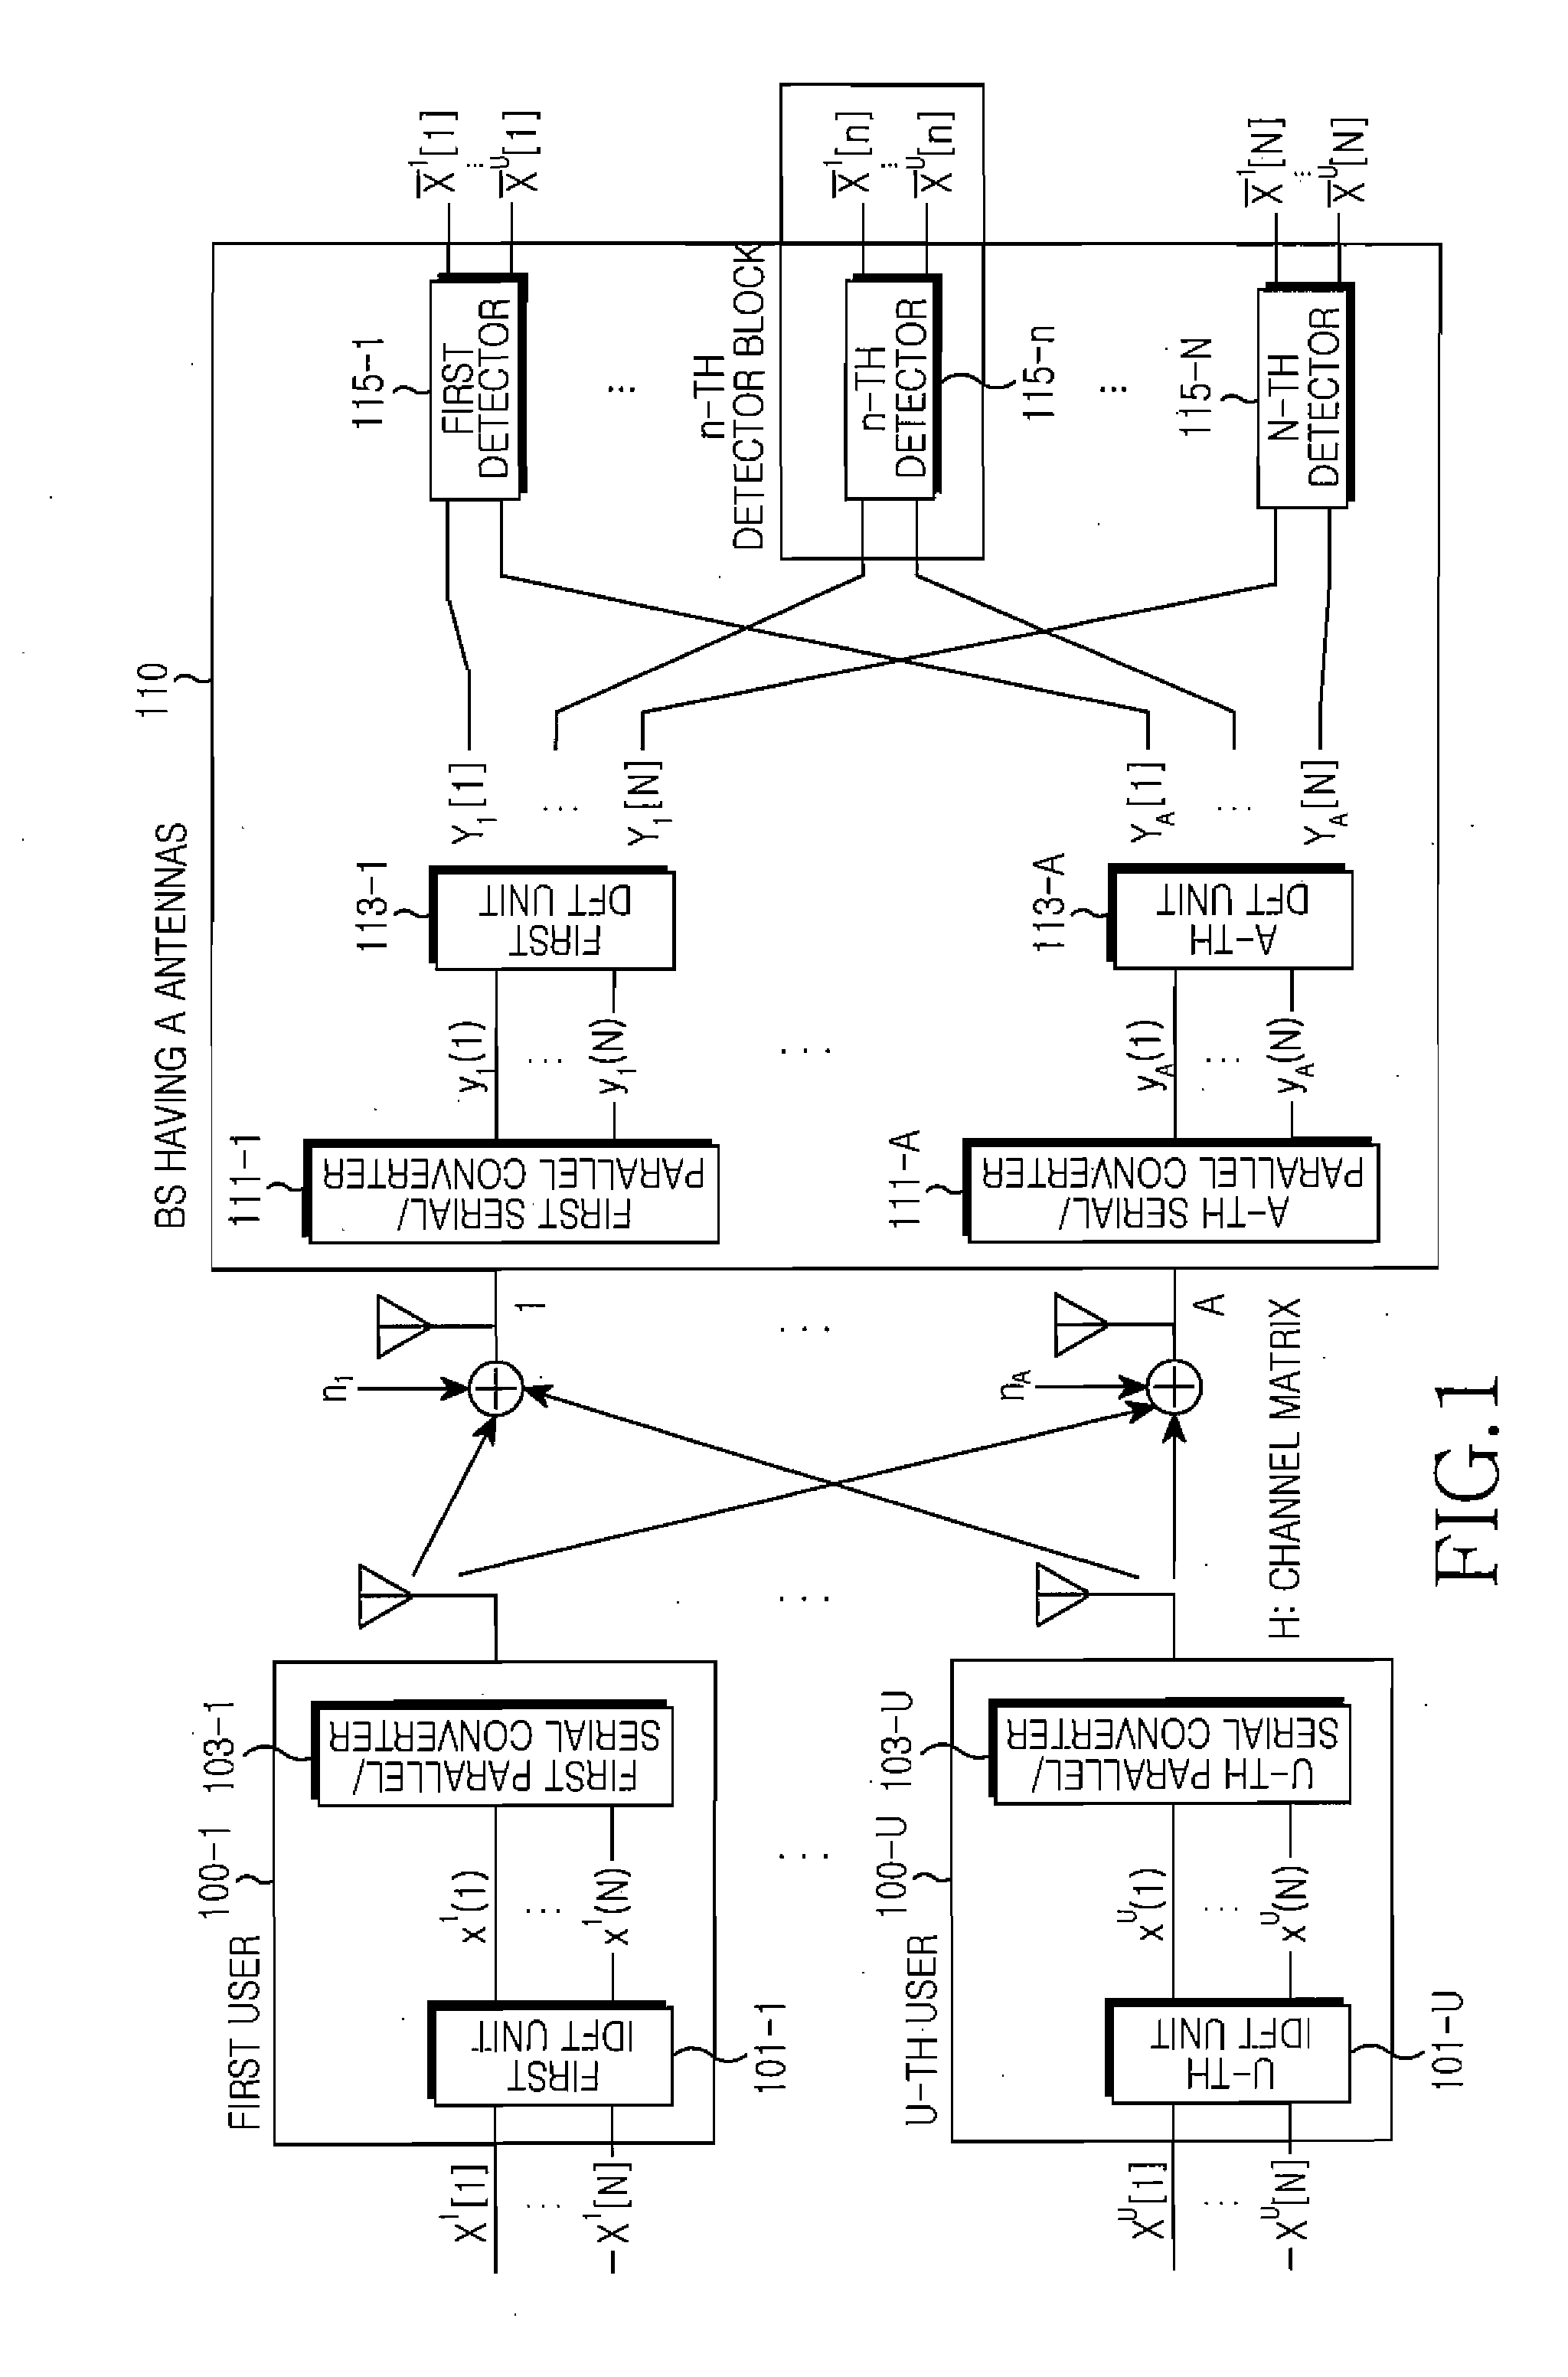 Apparatus and method for detecting signal in multi-input multi-output system